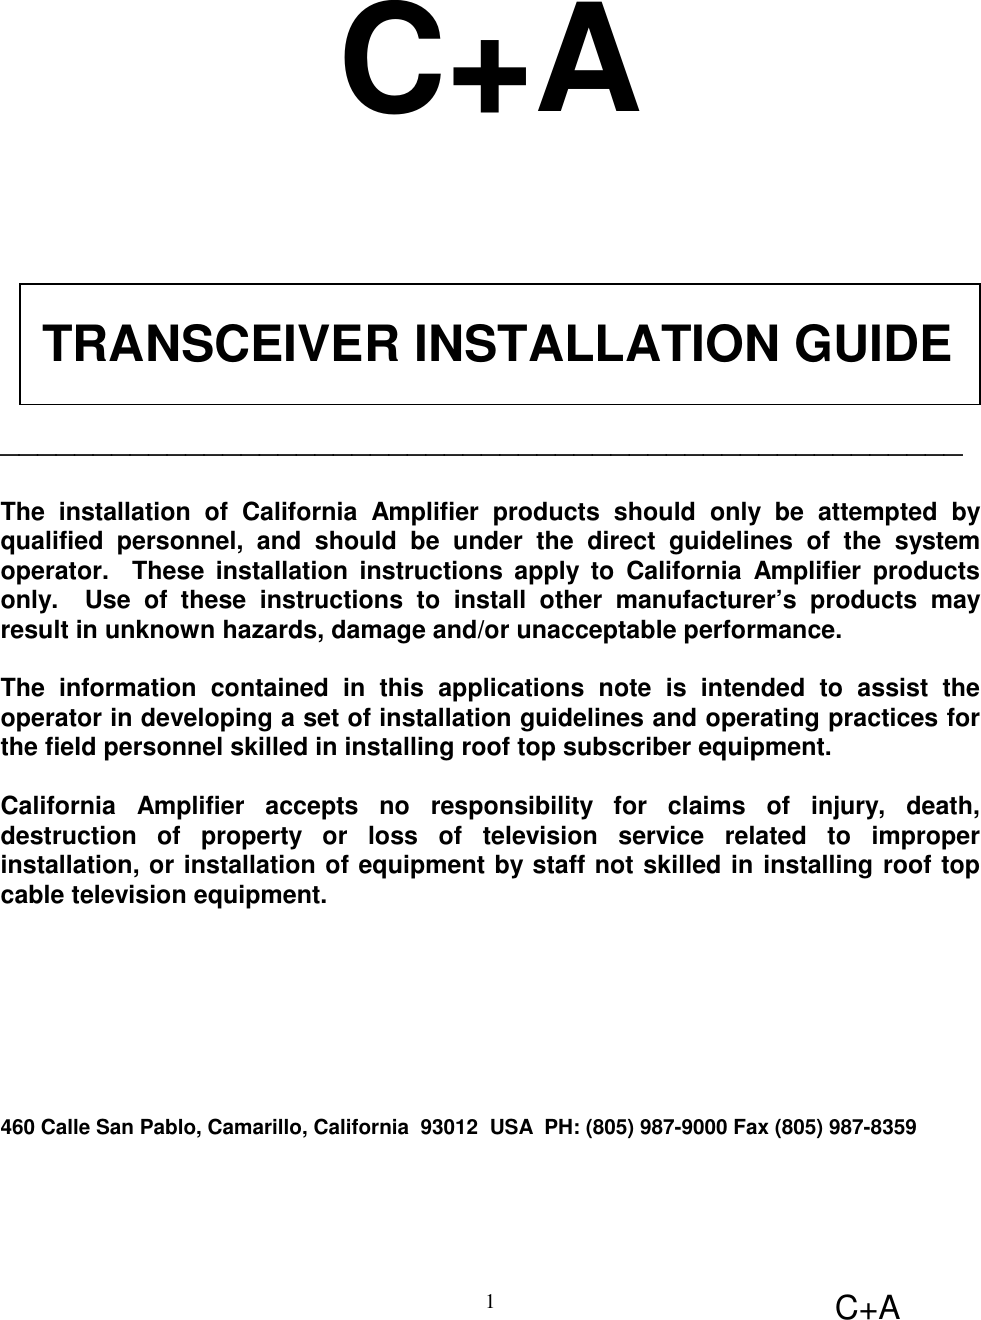 C+A1C+A TRANSCEIVER INSTALLATION GUIDE____________________________________________________The installation of California Amplifier products should only be attempted byqualified personnel, and should be under the direct guidelines of the systemoperator.  These installation instructions apply to California Amplifier productsonly.  Use of these instructions to install other manufacturer’s products mayresult in unknown hazards, damage and/or unacceptable performance.The information contained in this applications note is intended to assist theoperator in developing a set of installation guidelines and operating practices forthe field personnel skilled in installing roof top subscriber equipment.California Amplifier accepts no responsibility for claims of injury, death,destruction of property or loss of television service related to improperinstallation, or installation of equipment by staff not skilled in installing roof topcable television equipment.460 Calle San Pablo, Camarillo, California  93012  USA  PH: (805) 987-9000 Fax (805) 987-8359